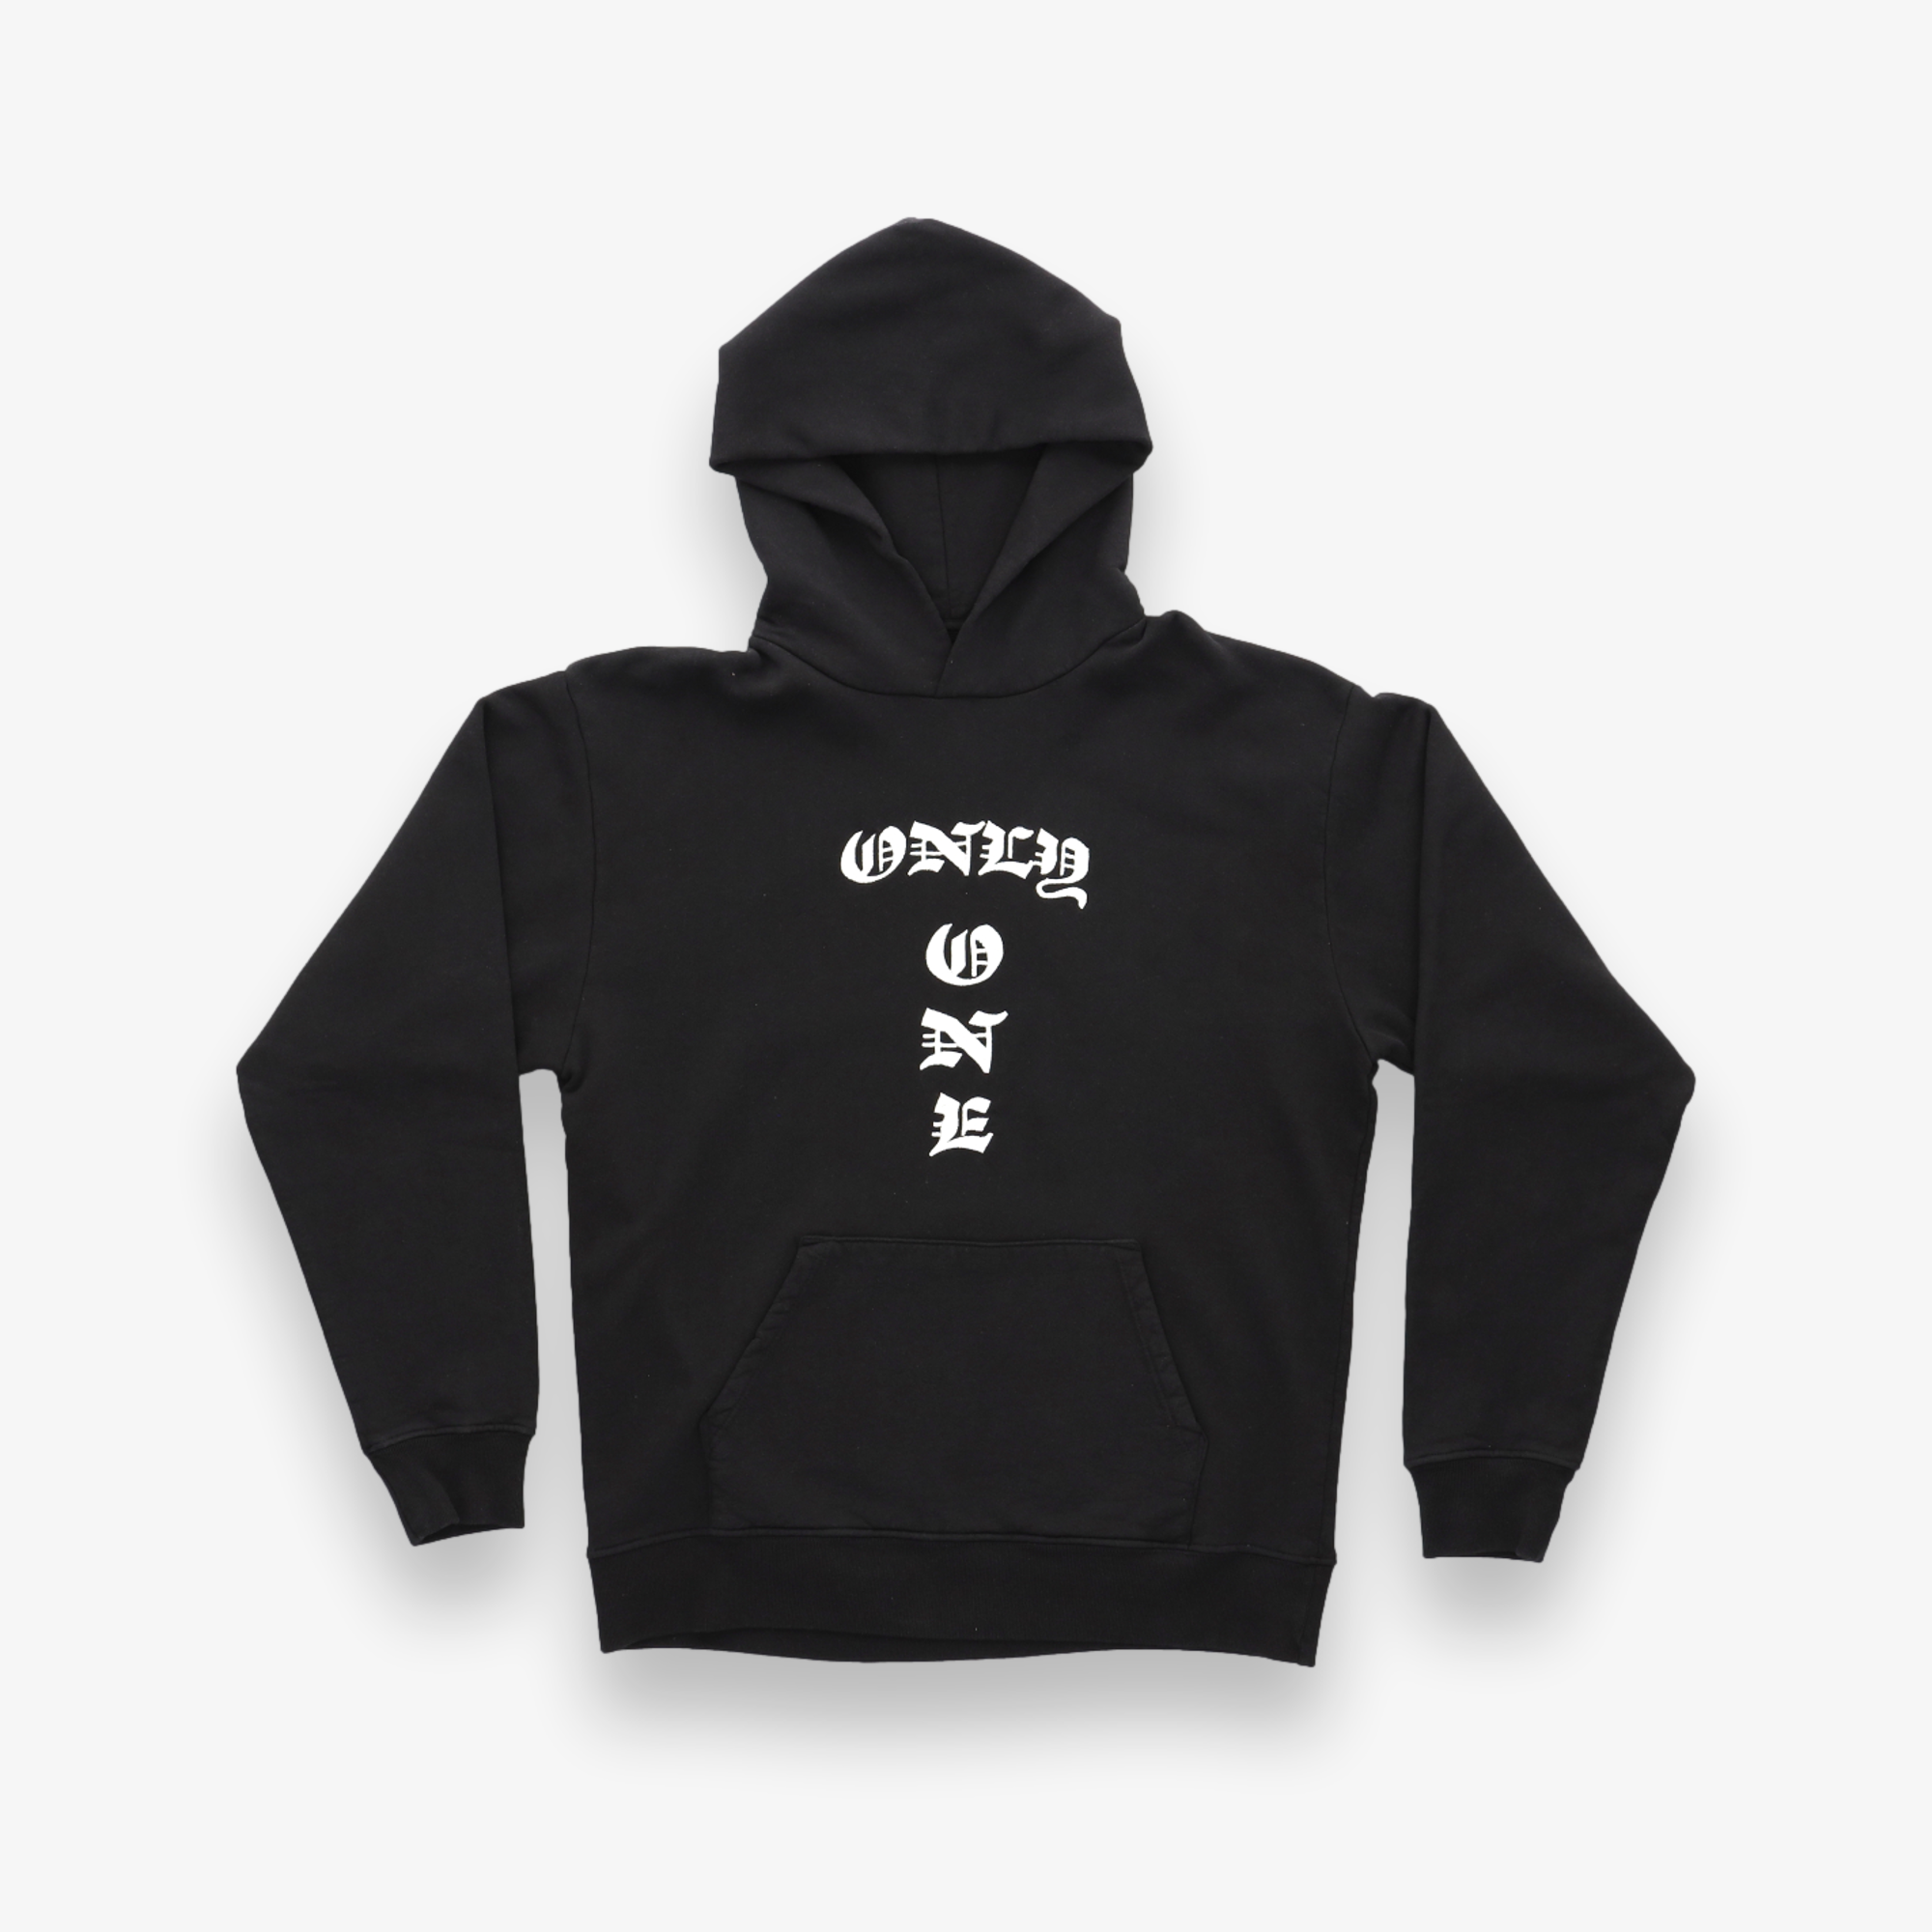 Only One Pullover Hoodie U.S.A